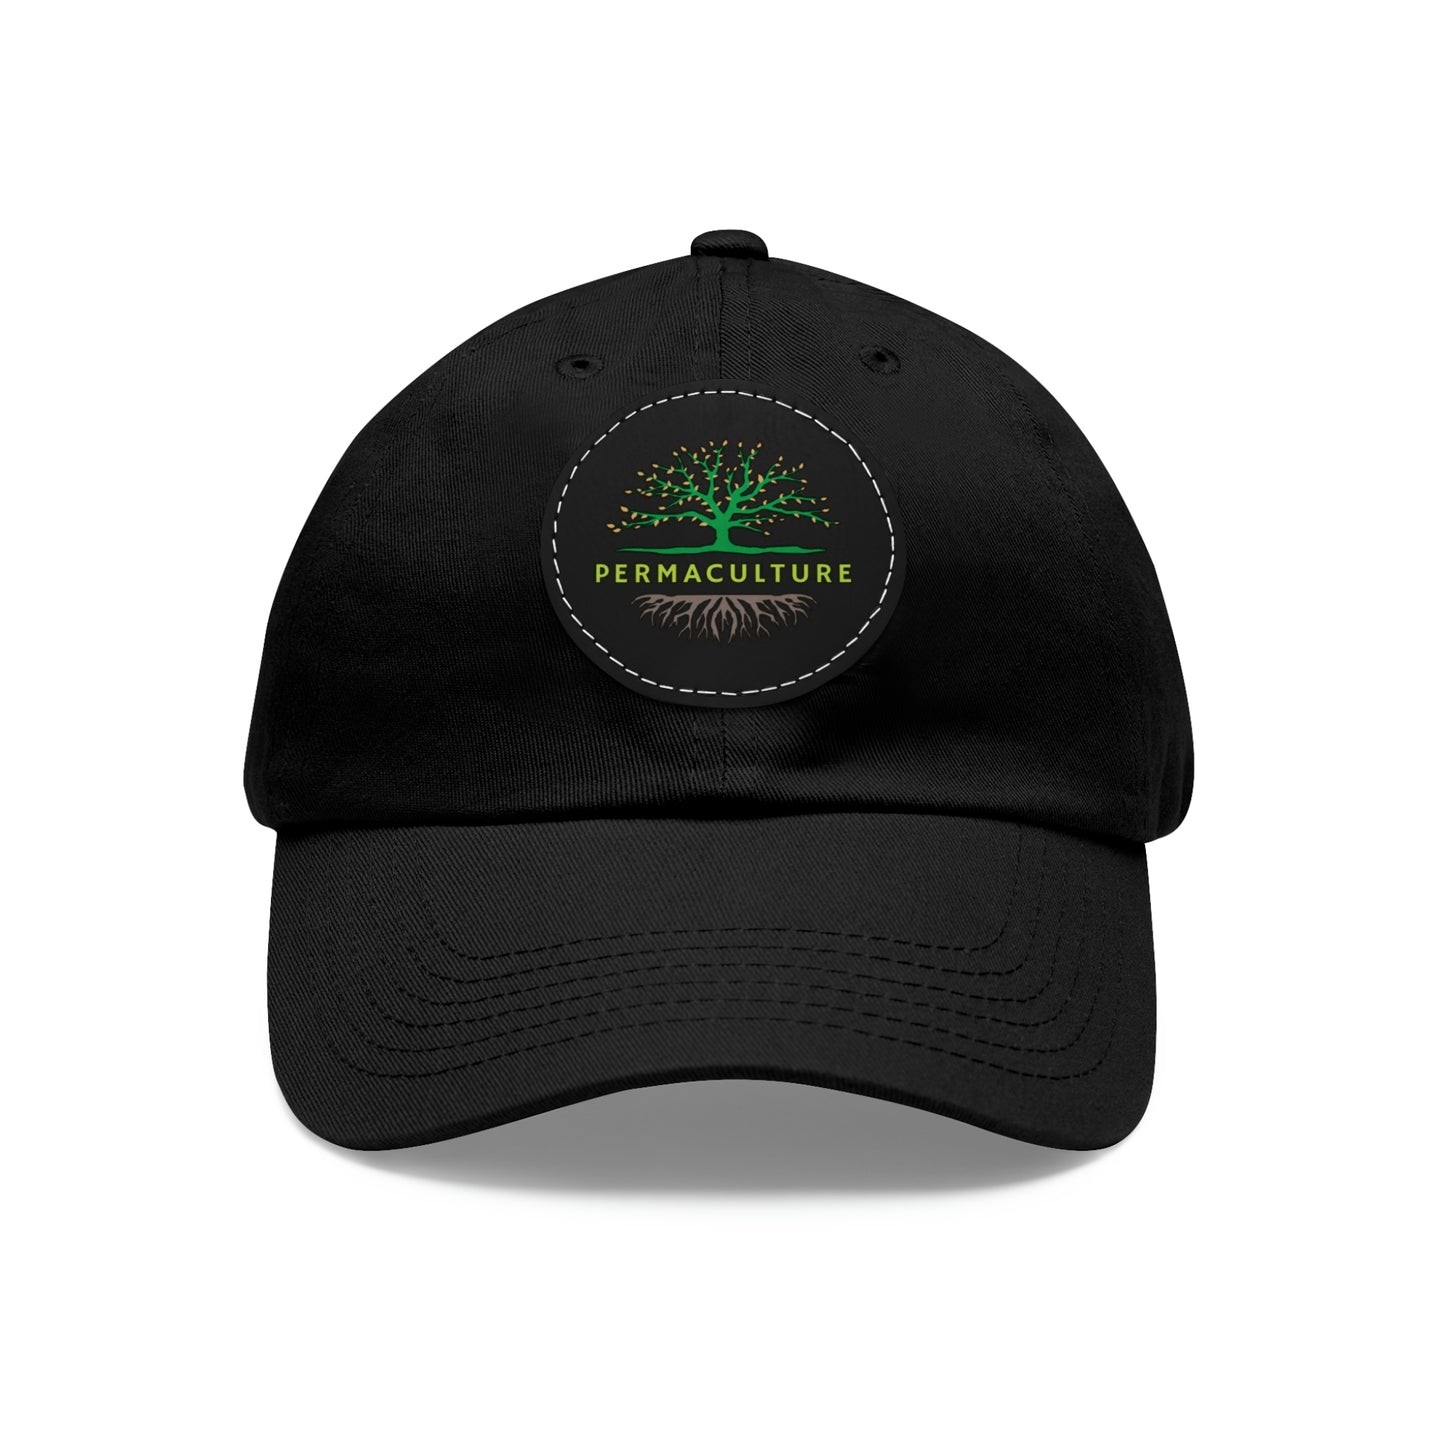 Permaculture - Dad Hat with Round Leather Patch